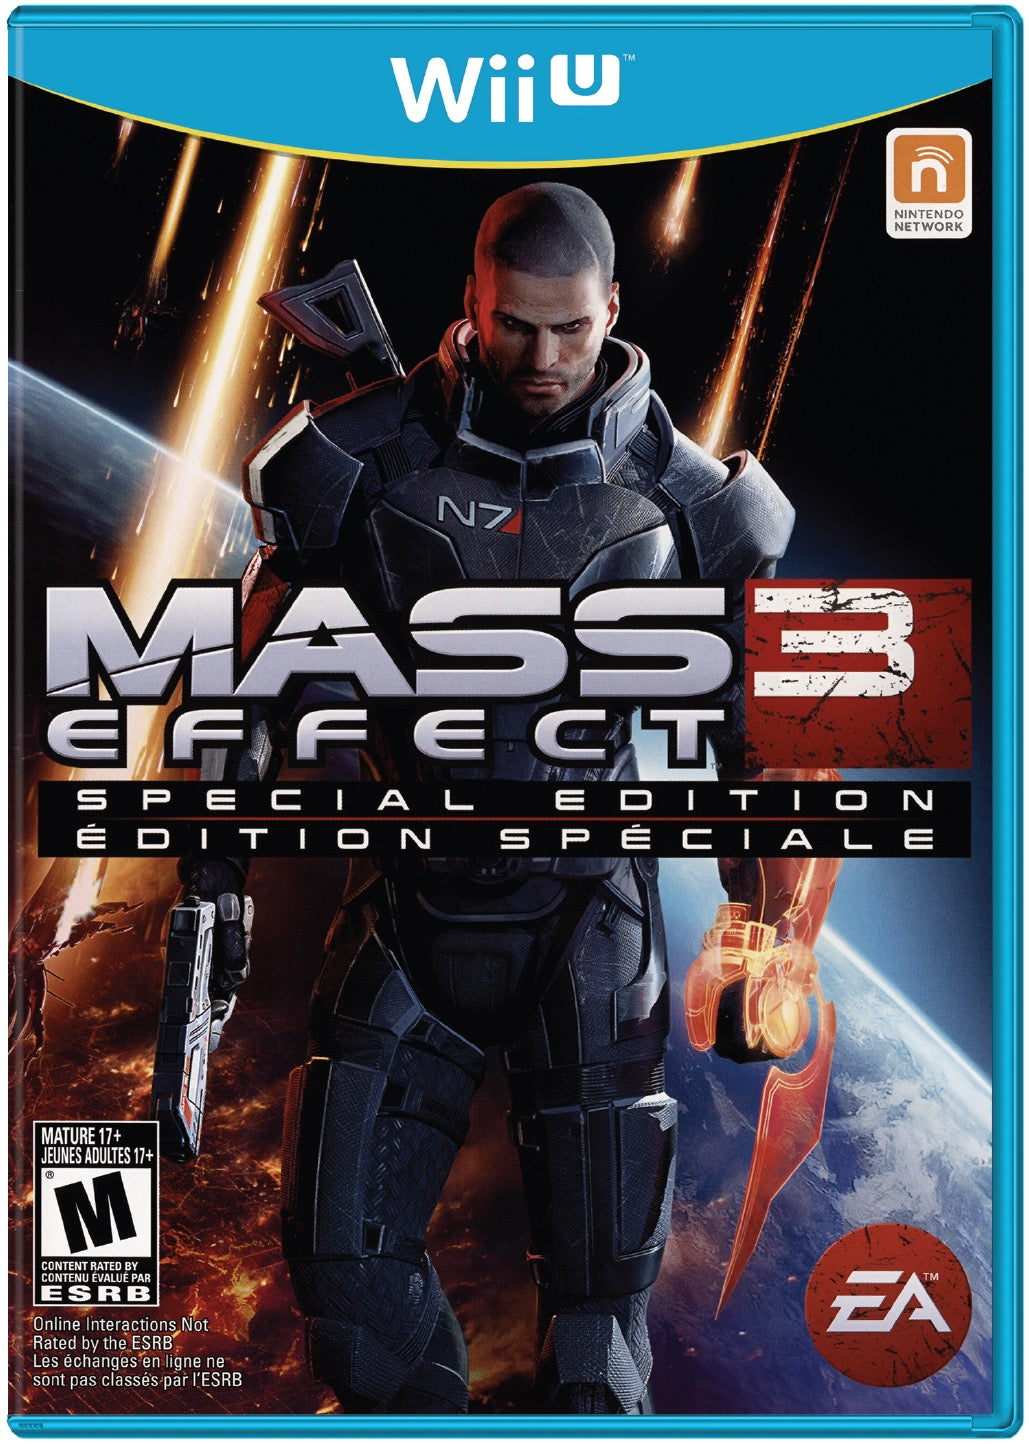 Mass Effect 3 Cover Art and Product Photo